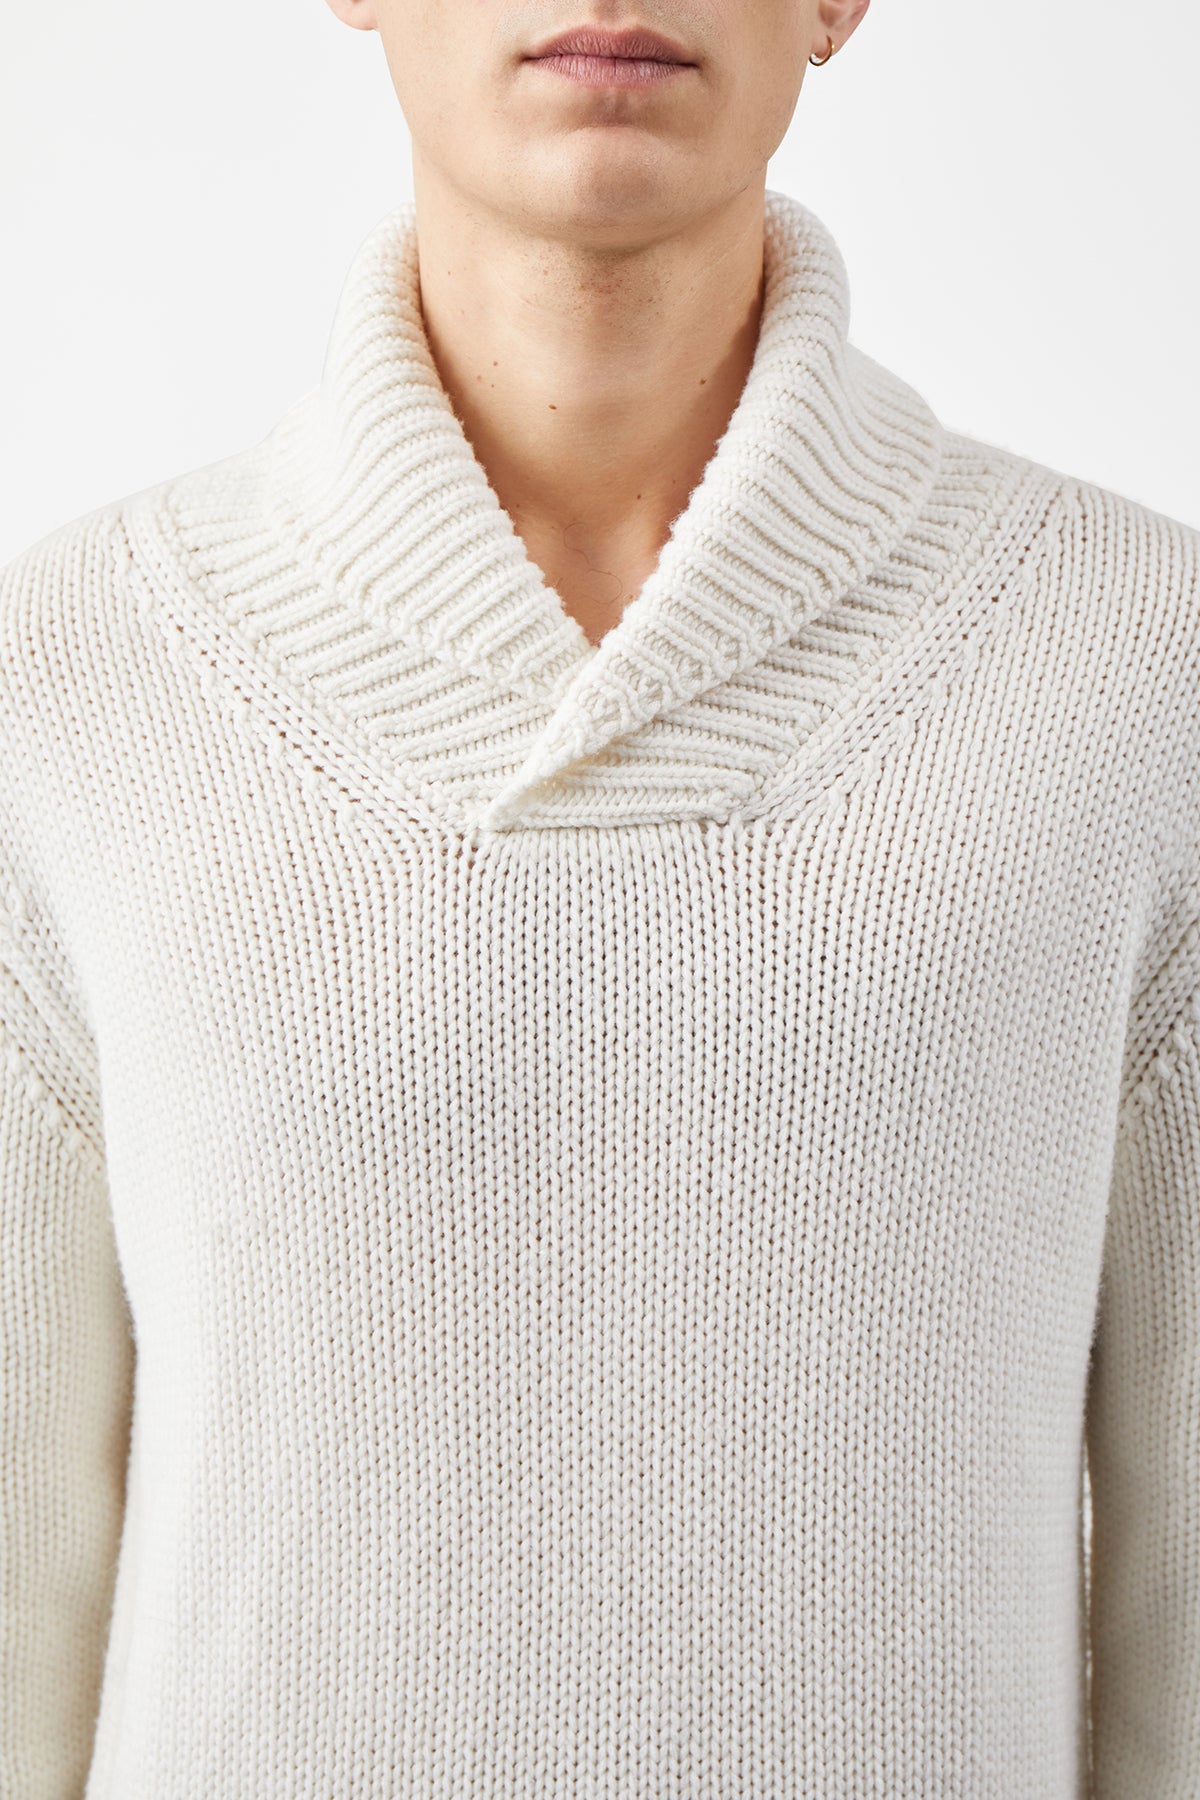 Sal Sweater in Ivory Cashmere